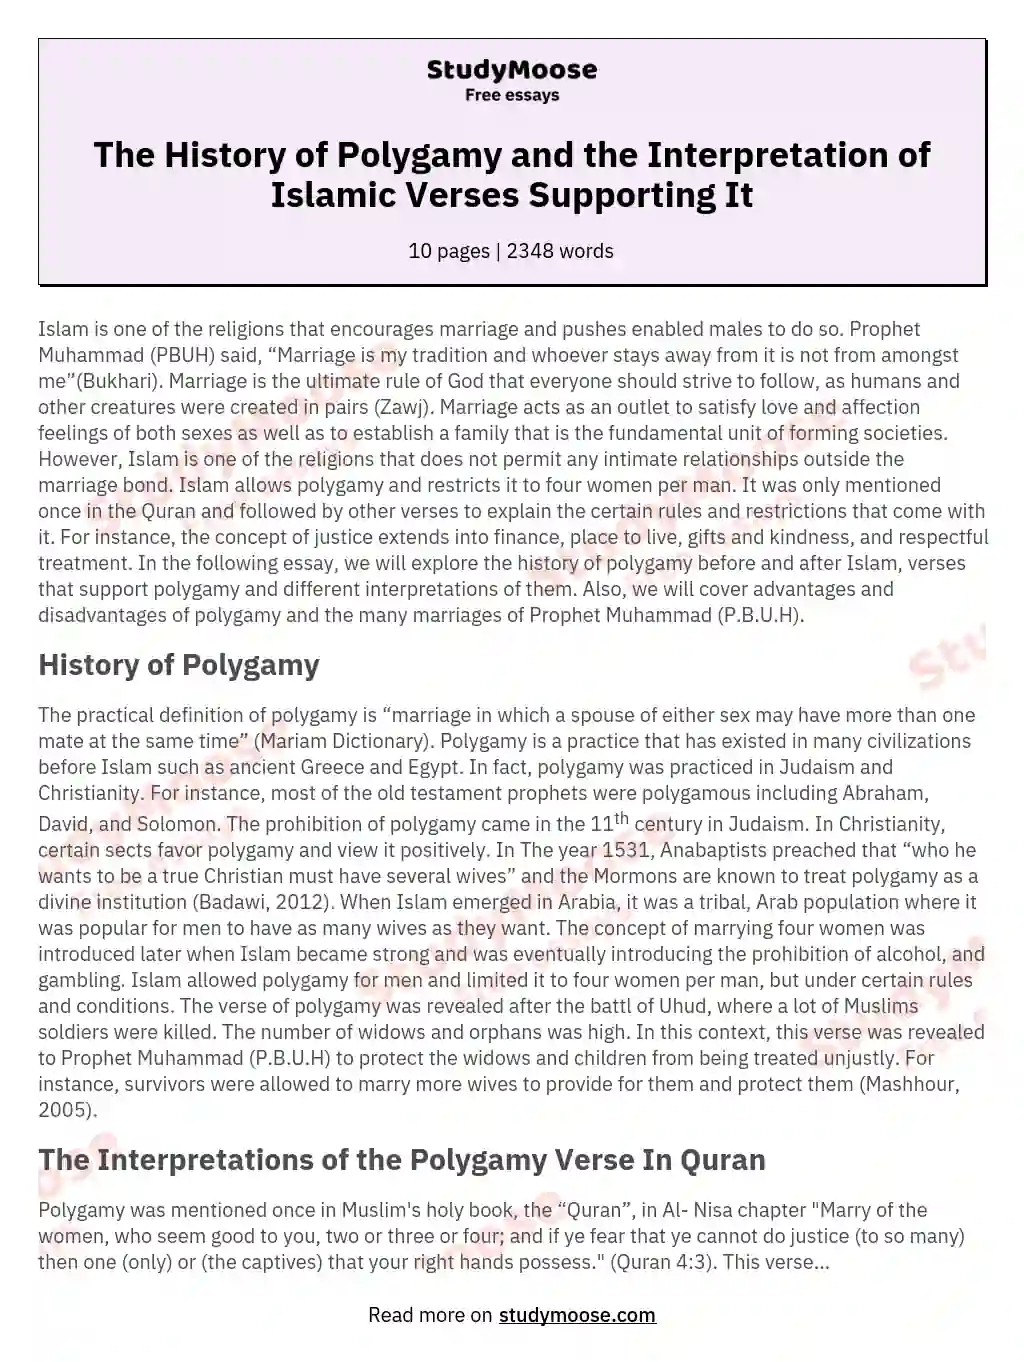 The History of Polygamy and the Interpretation of Islamic Verses Supporting It essay